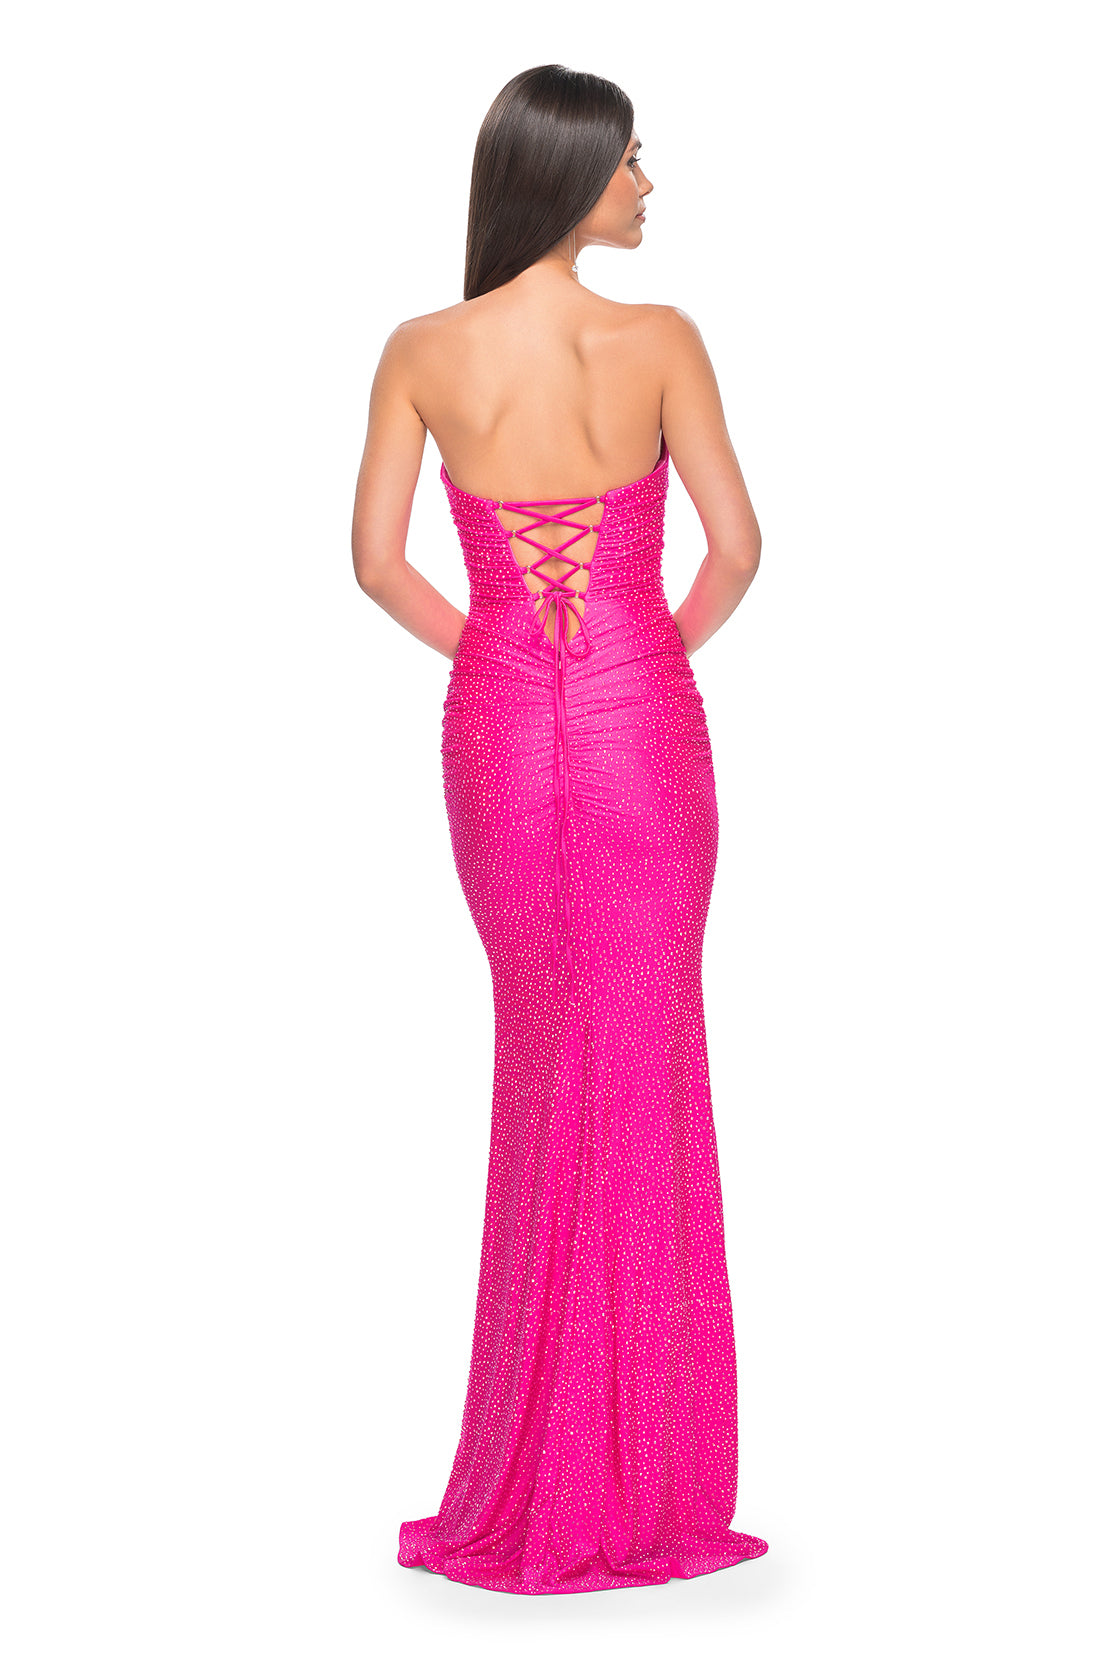 La Femme 32436 Strapless Rhinestone Embellished Prom Gown - A glamorous prom gown with a strapless design, tonal rhinestone embellishments, sweetheart neckline, and a lace-up back for added allure.  Model is wearing neon pink.